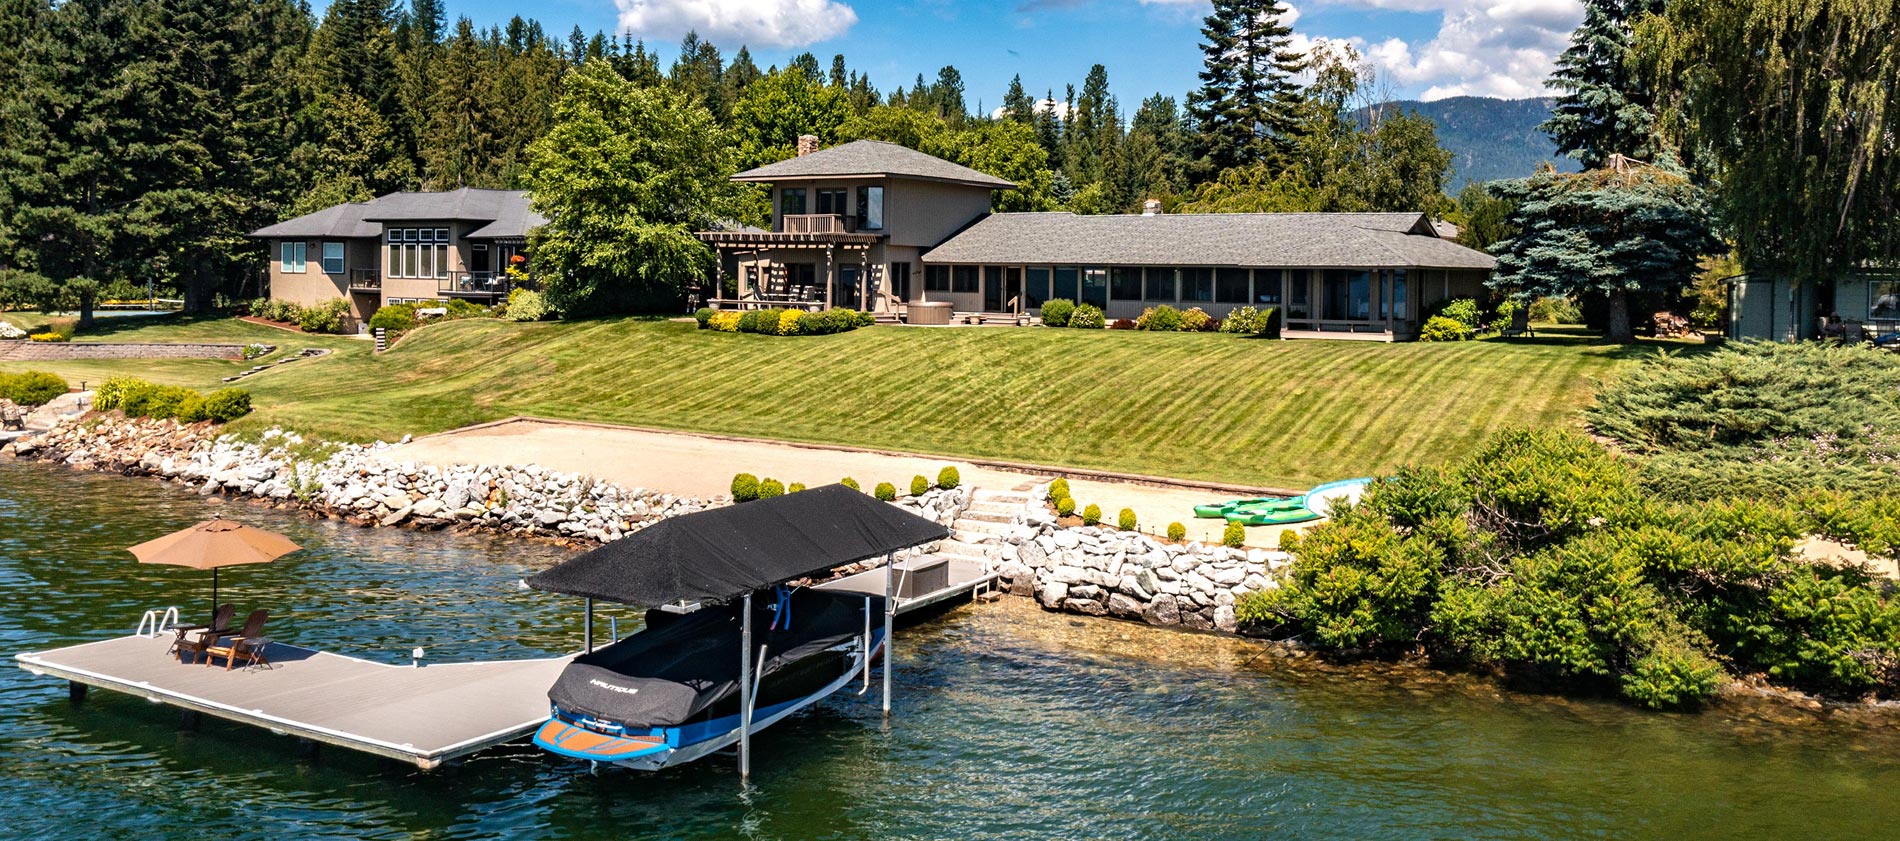 private beach, 140 feet of frontage, private dock with boat lift and stunning views